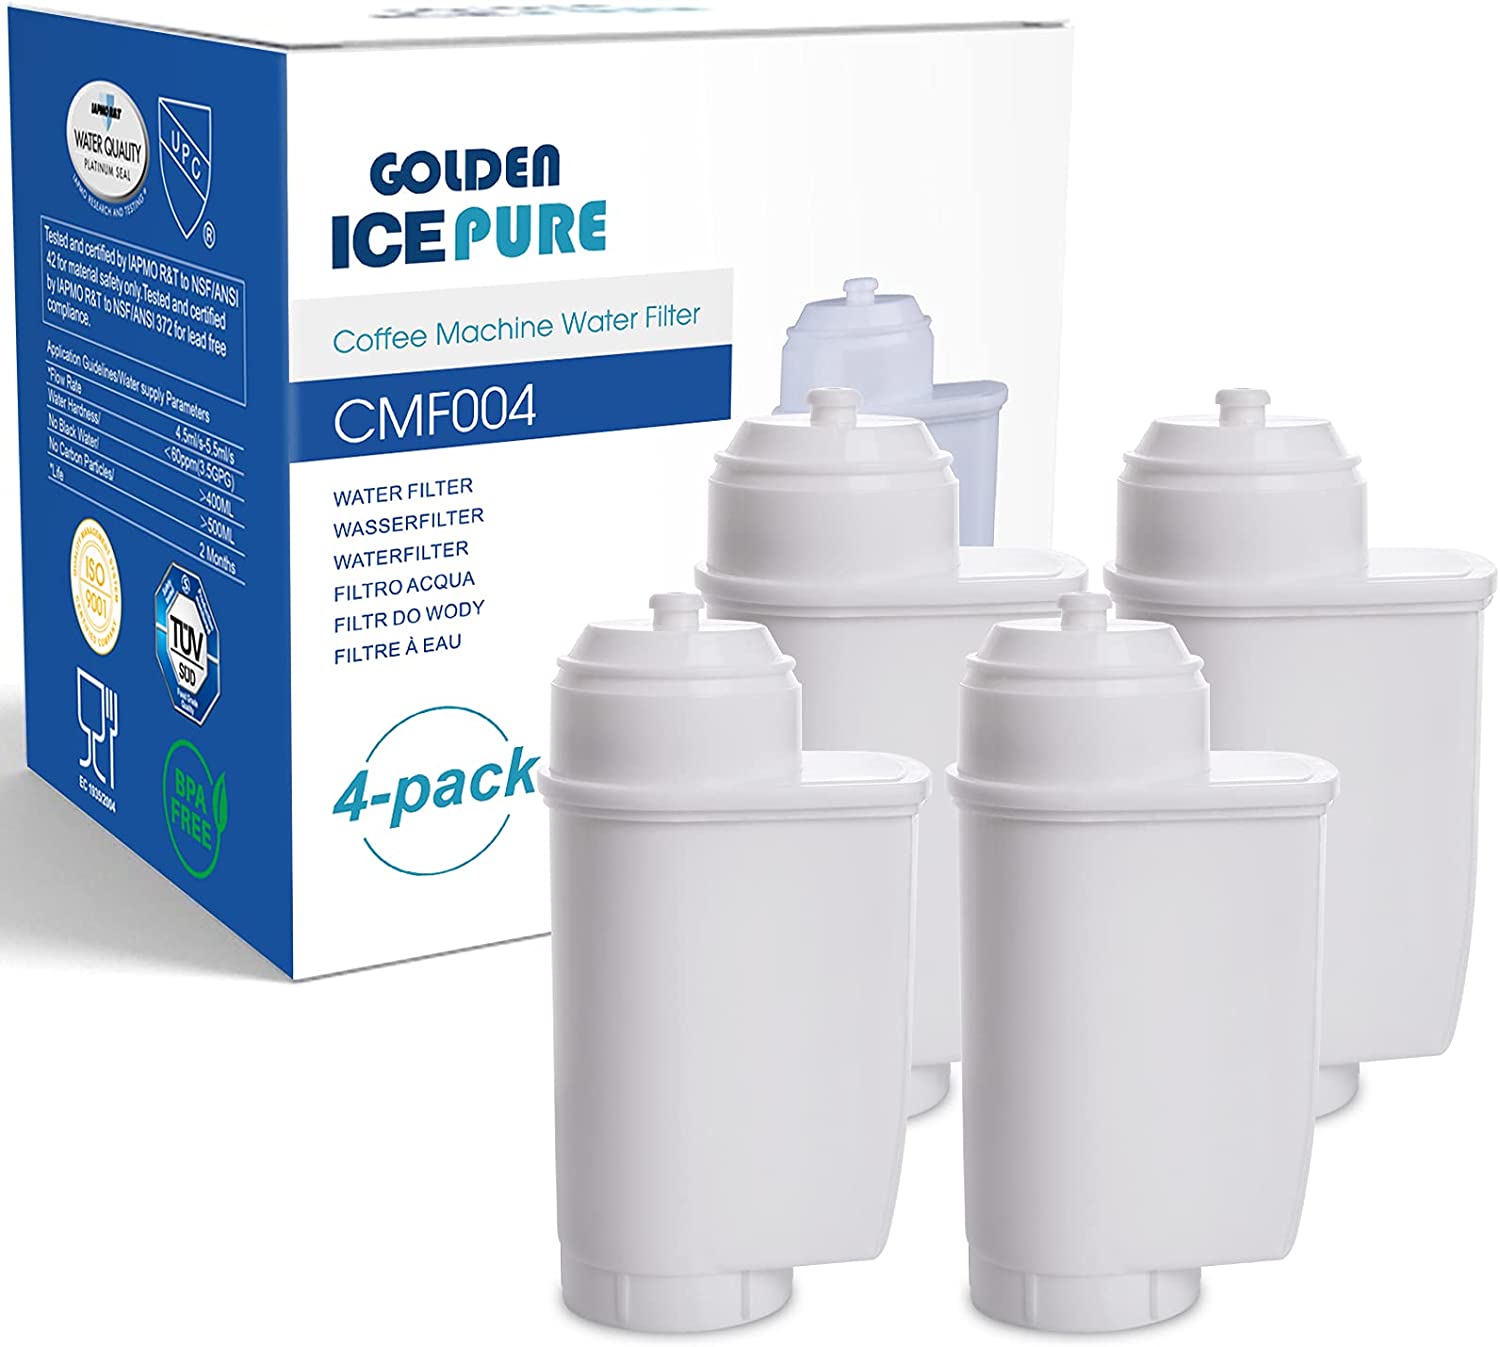 Golden Icepure Tüv Süd NSF Certified Fully Automatic Coffee Machine Water Filter CMF004, Replacement for Siemens EQ Series, EQ 6, Siemens TZ70003, TCZ7003, TCZ7033